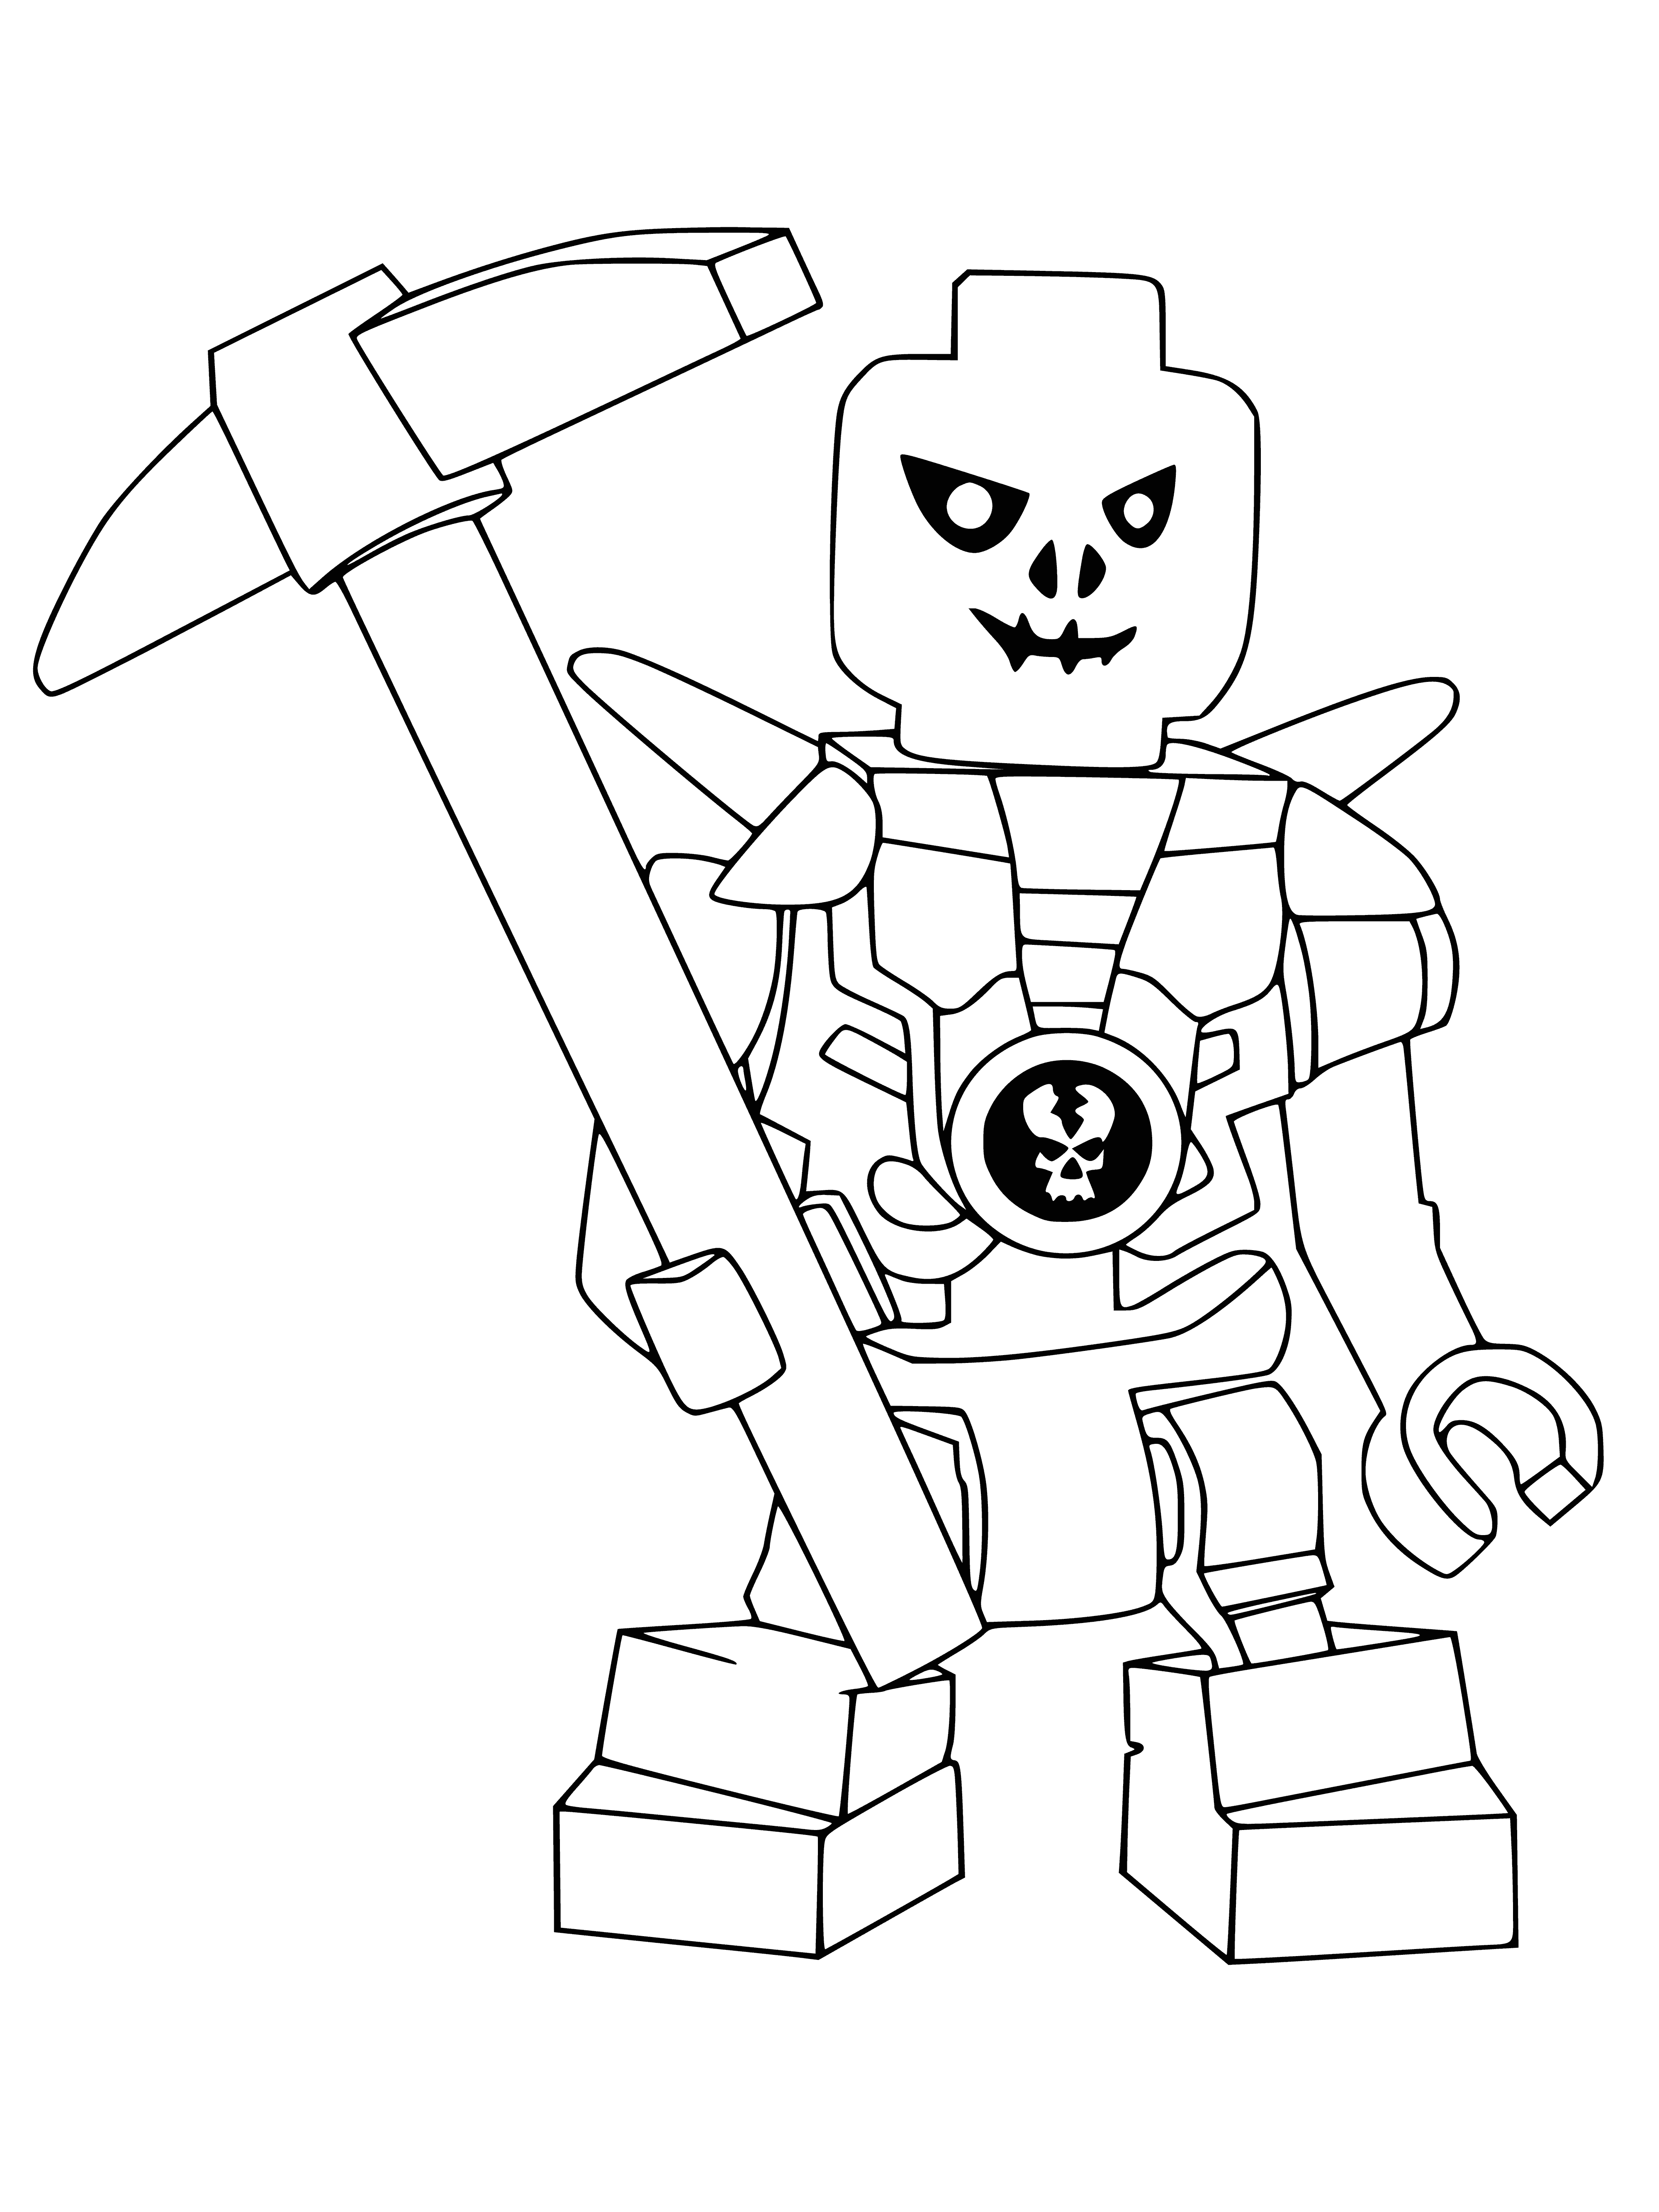 coloring page: LEGO skeleton with ninja outfit and sword. Black eyes, white body.